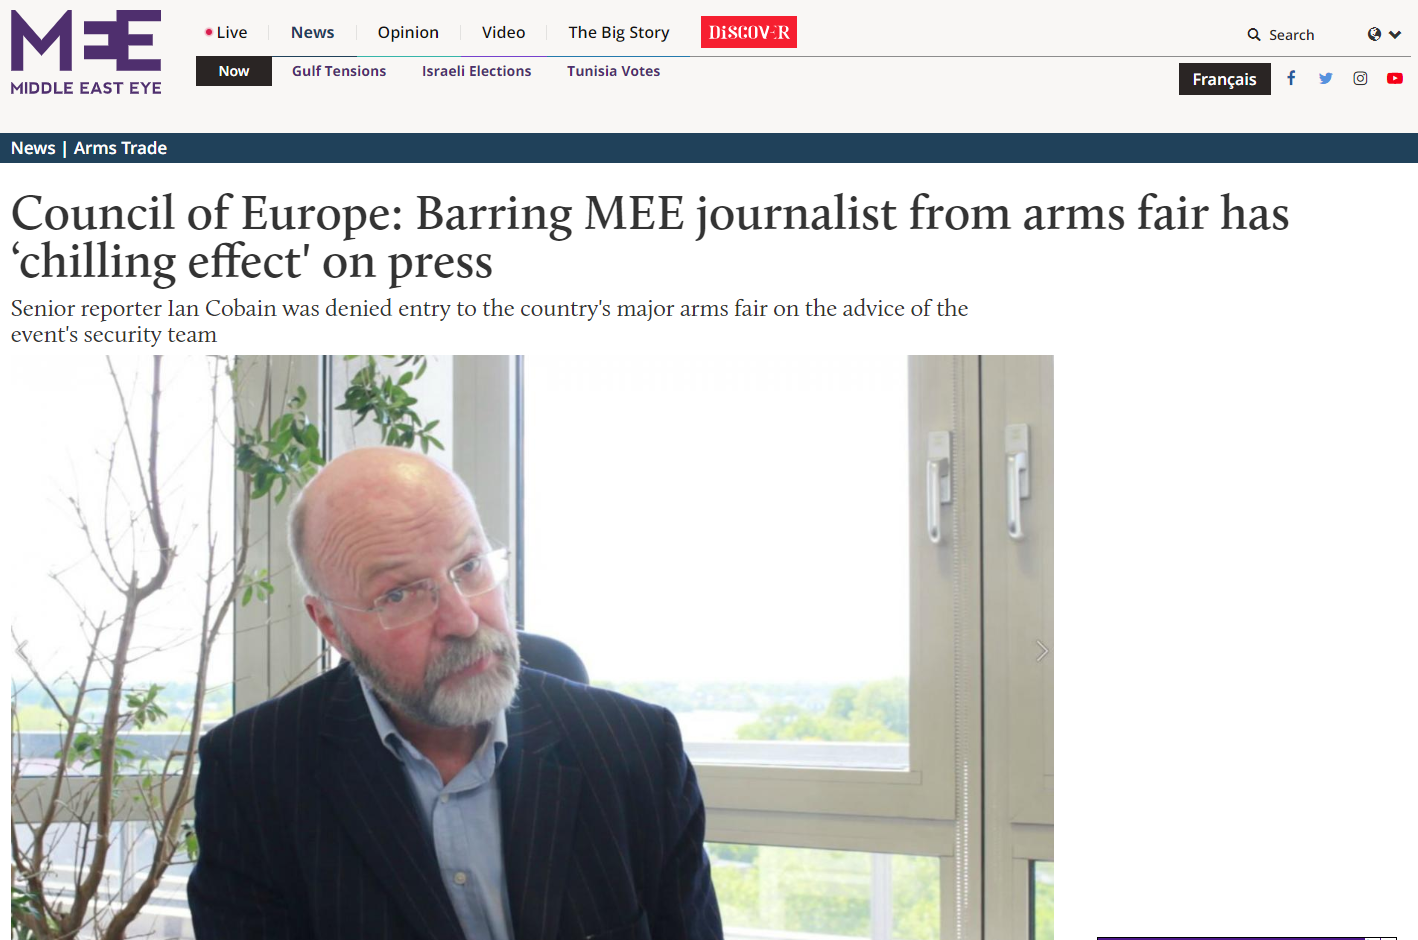 Council of Europe: Barring MEE journalist from arms fair has ‘chilling effect’ on press (Middle East Eye)